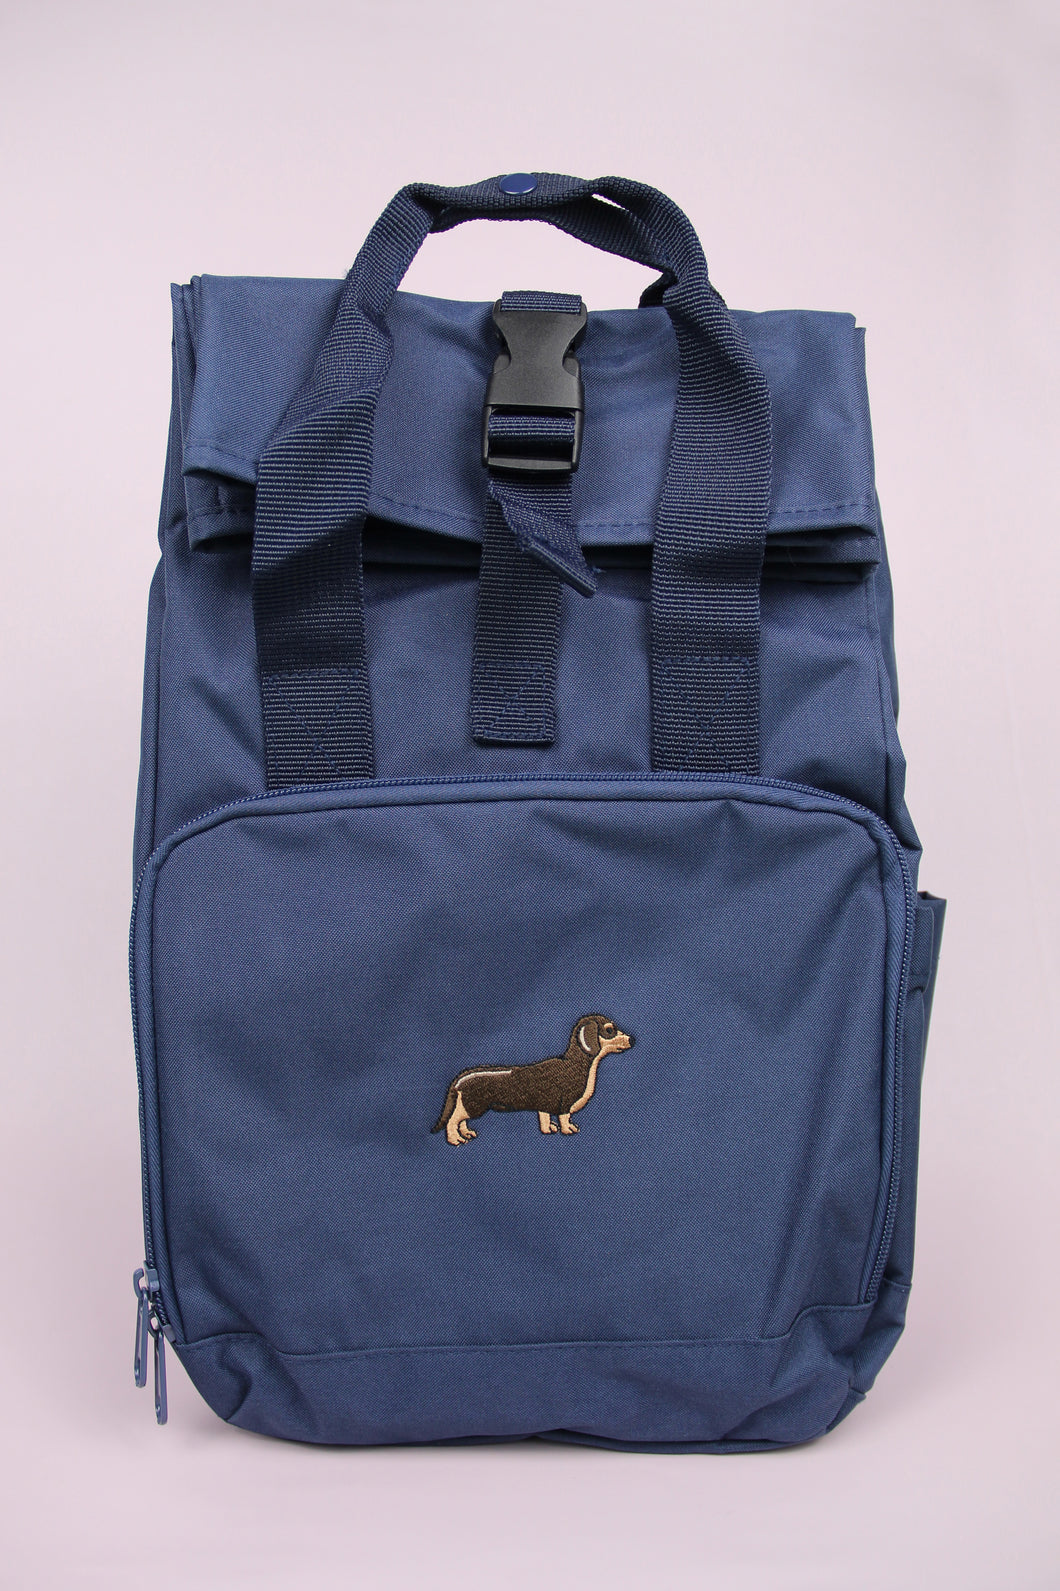 Dachshund Recycled Backpack - Navy